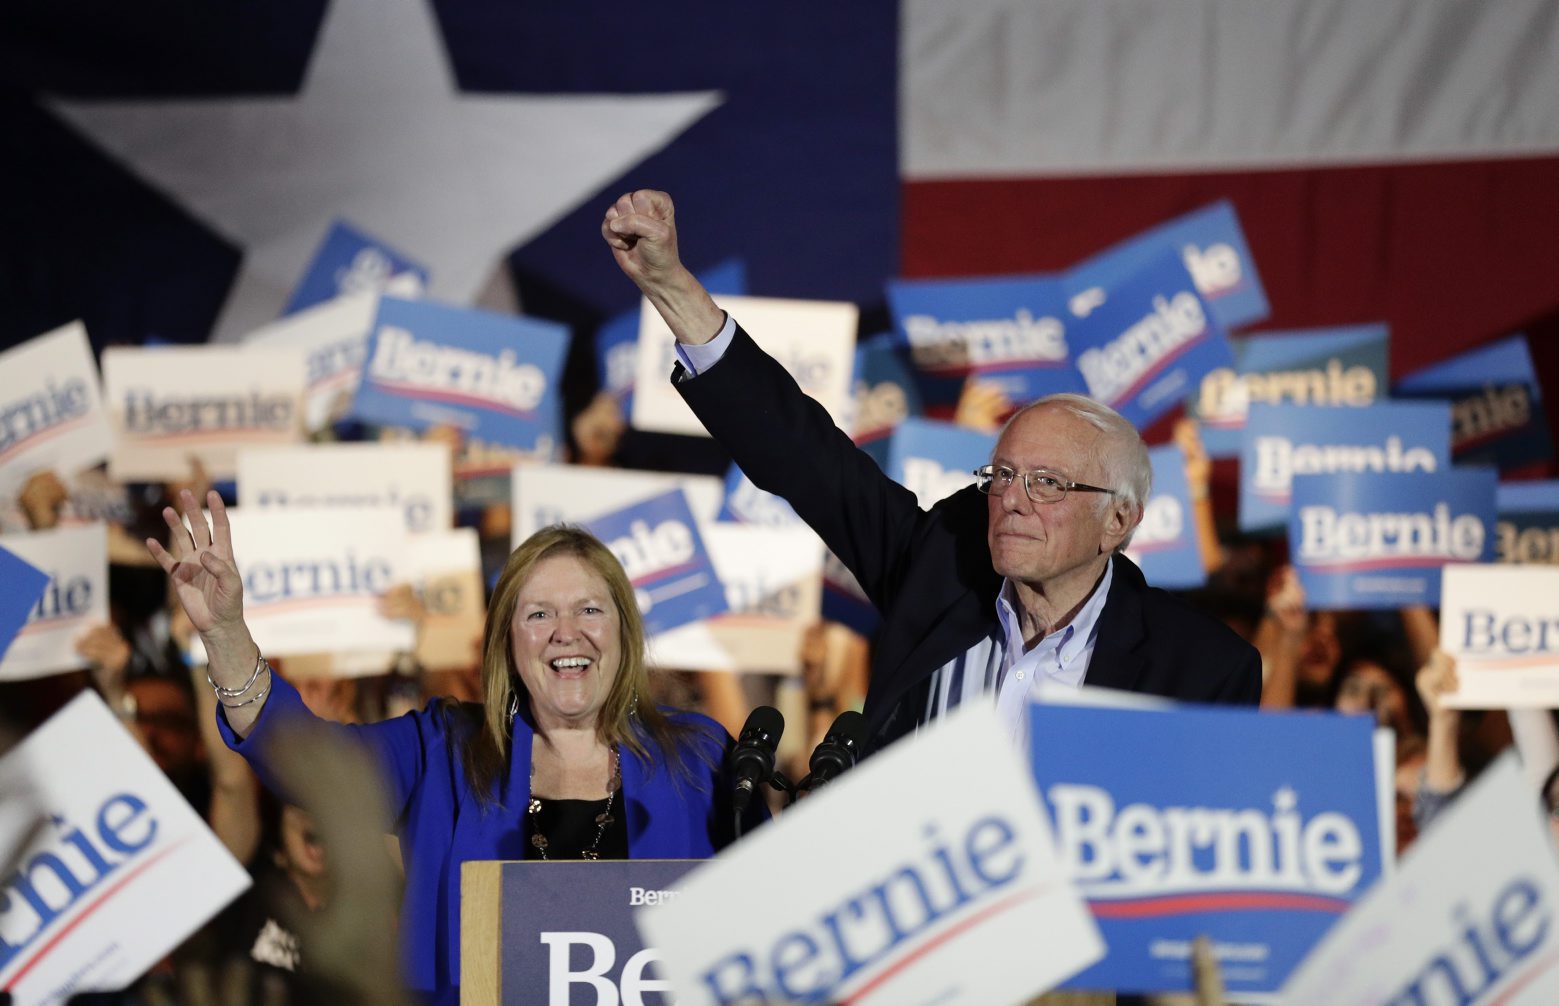 Democratic presidential candidate Sen. Bernie Sanders, I-Vt., right, with his wife Jane, raises his hand as he speaks during a campaign event in San Antonio, Saturday, Feb. 22, 2020. (AP Photo/Eric Gay)
Bernie Sanders,Jane Sanders Election 2020 Bernie Sanders